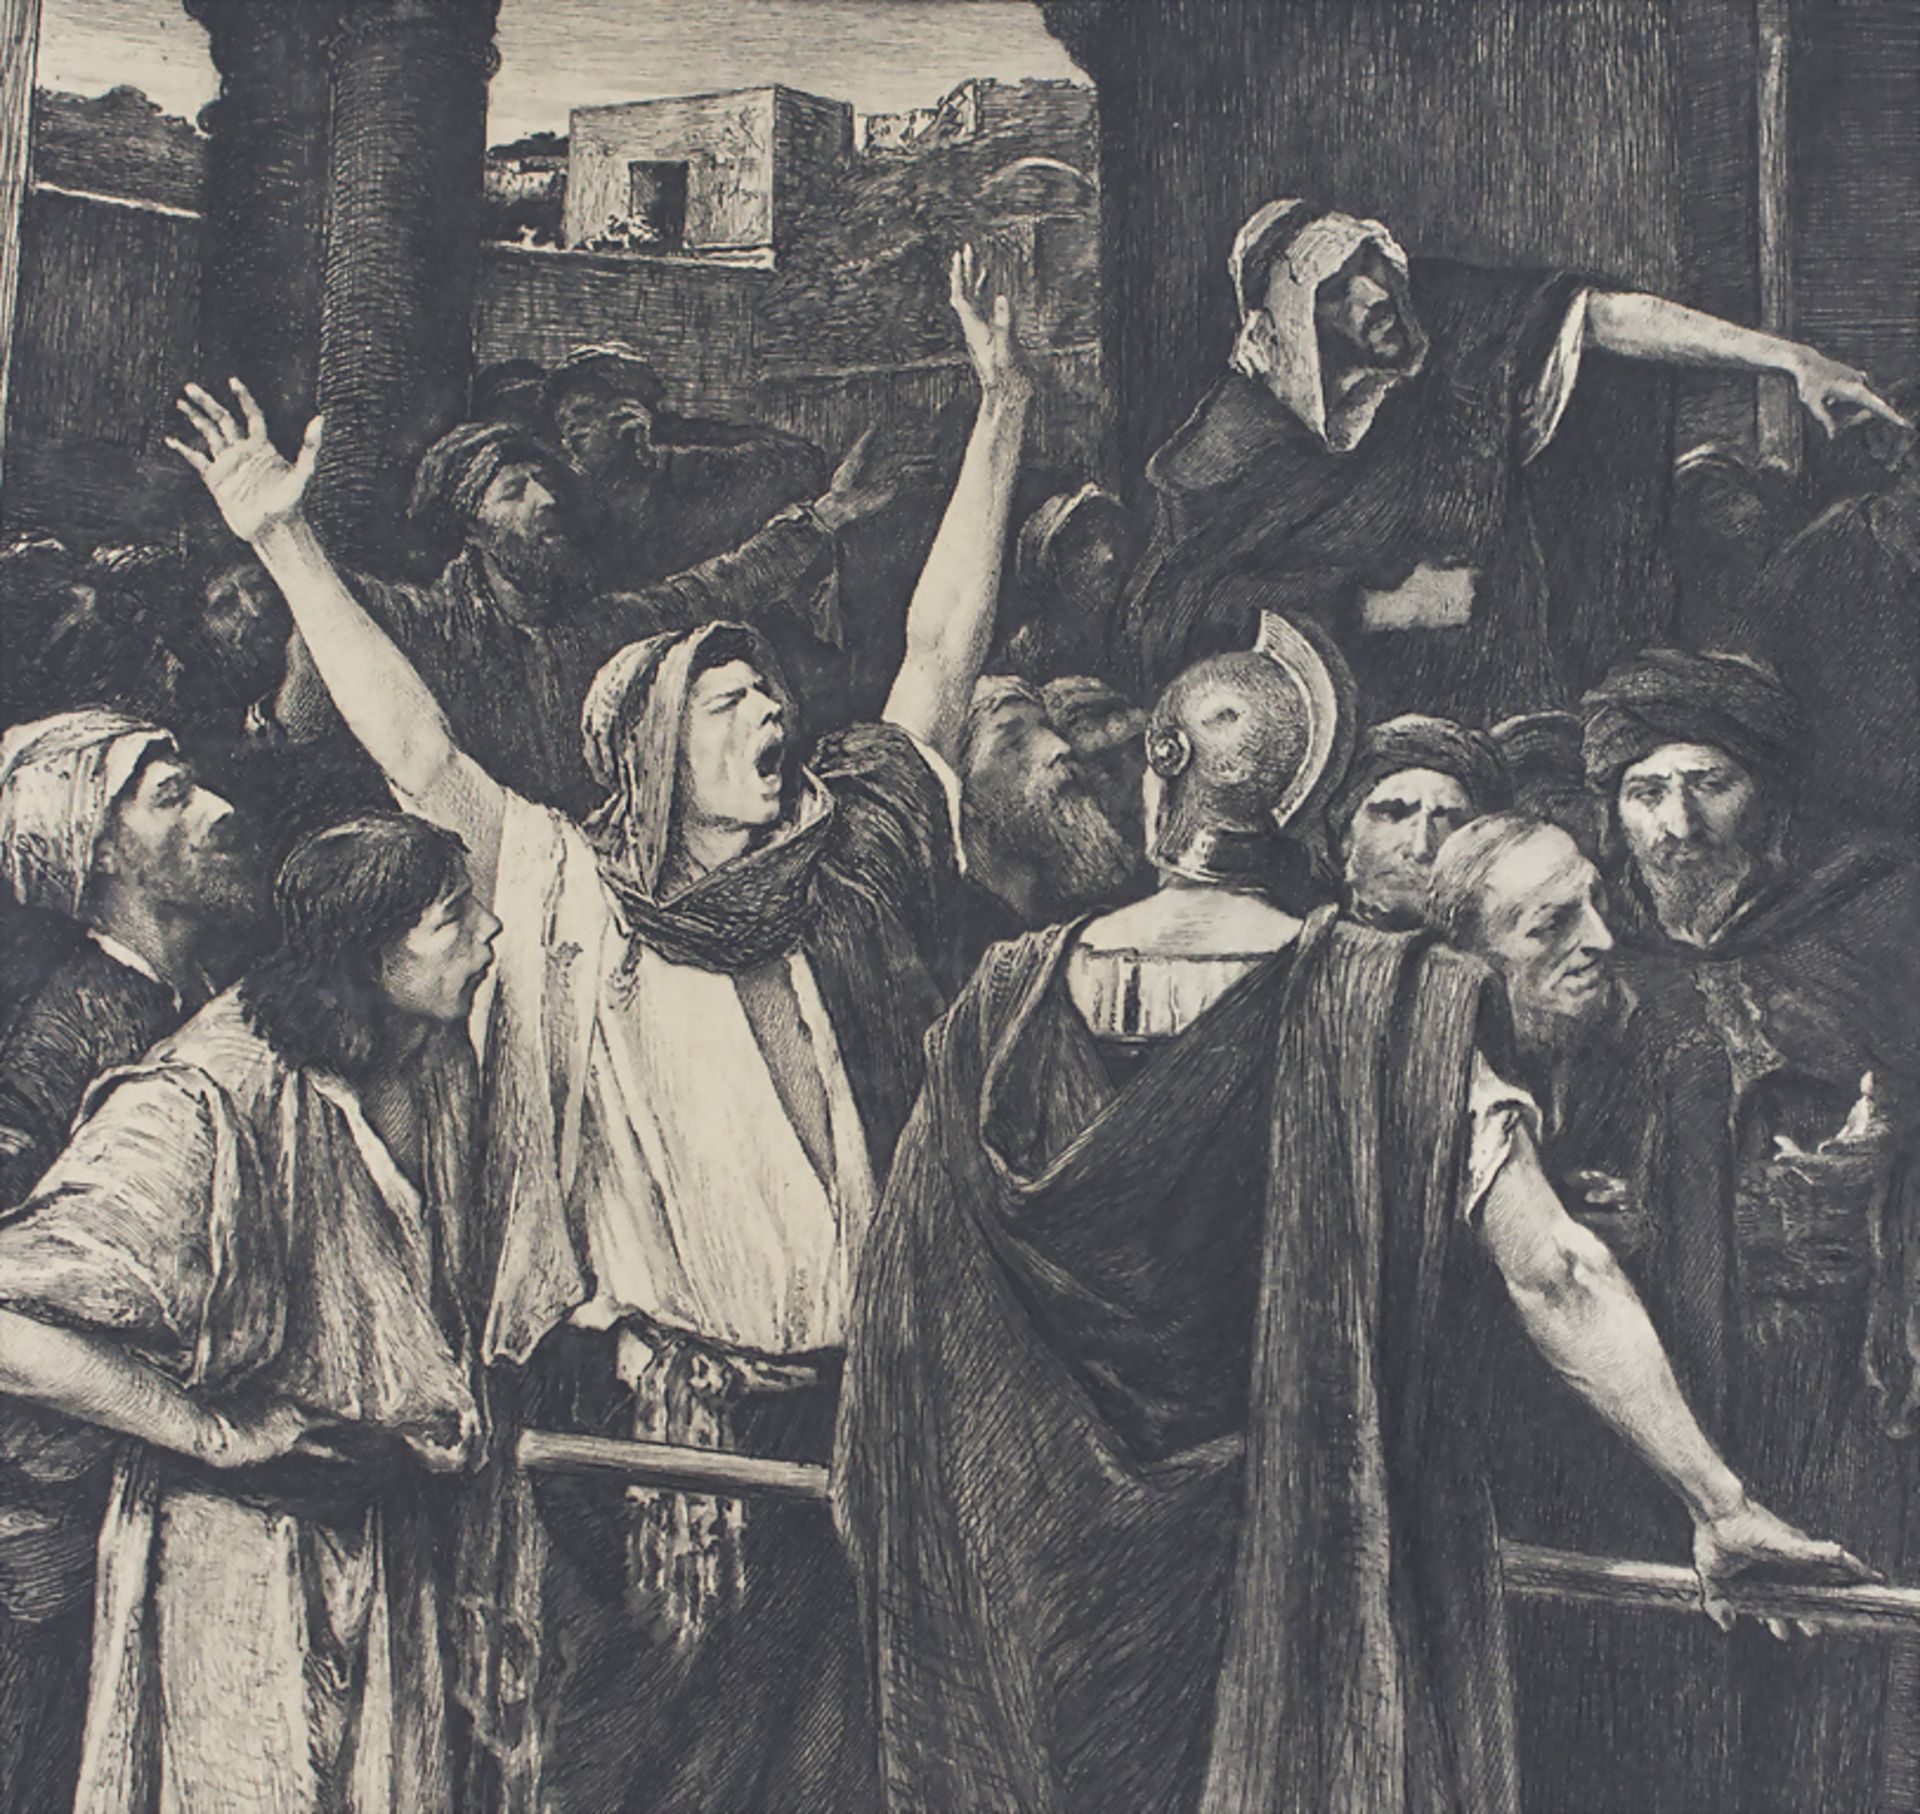 Mihály Munkácsy (1844-1900), 'Le Christ devant Pilate' / 'Christ in front of Pilatus', 1881 - Image 11 of 17